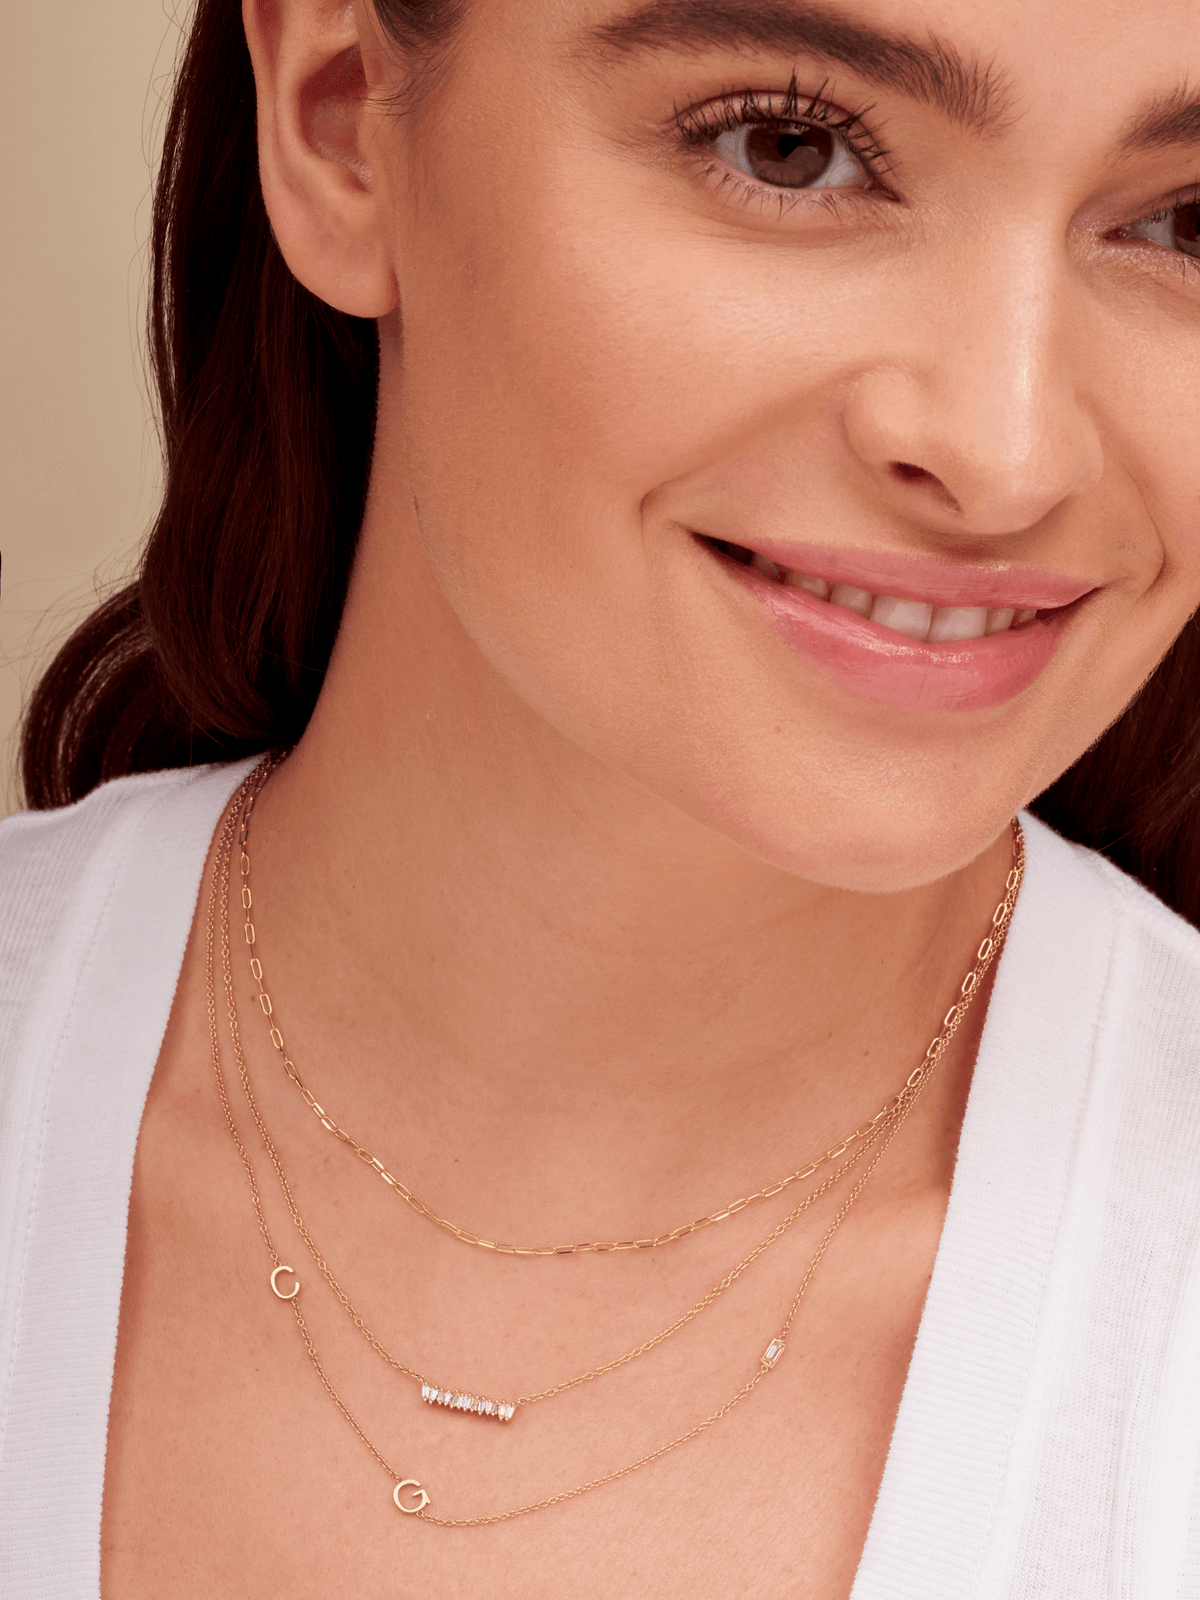 Dainty gold chain necklace layered with diamond baguette bar necklace and gold initial necklace with diamond baguette